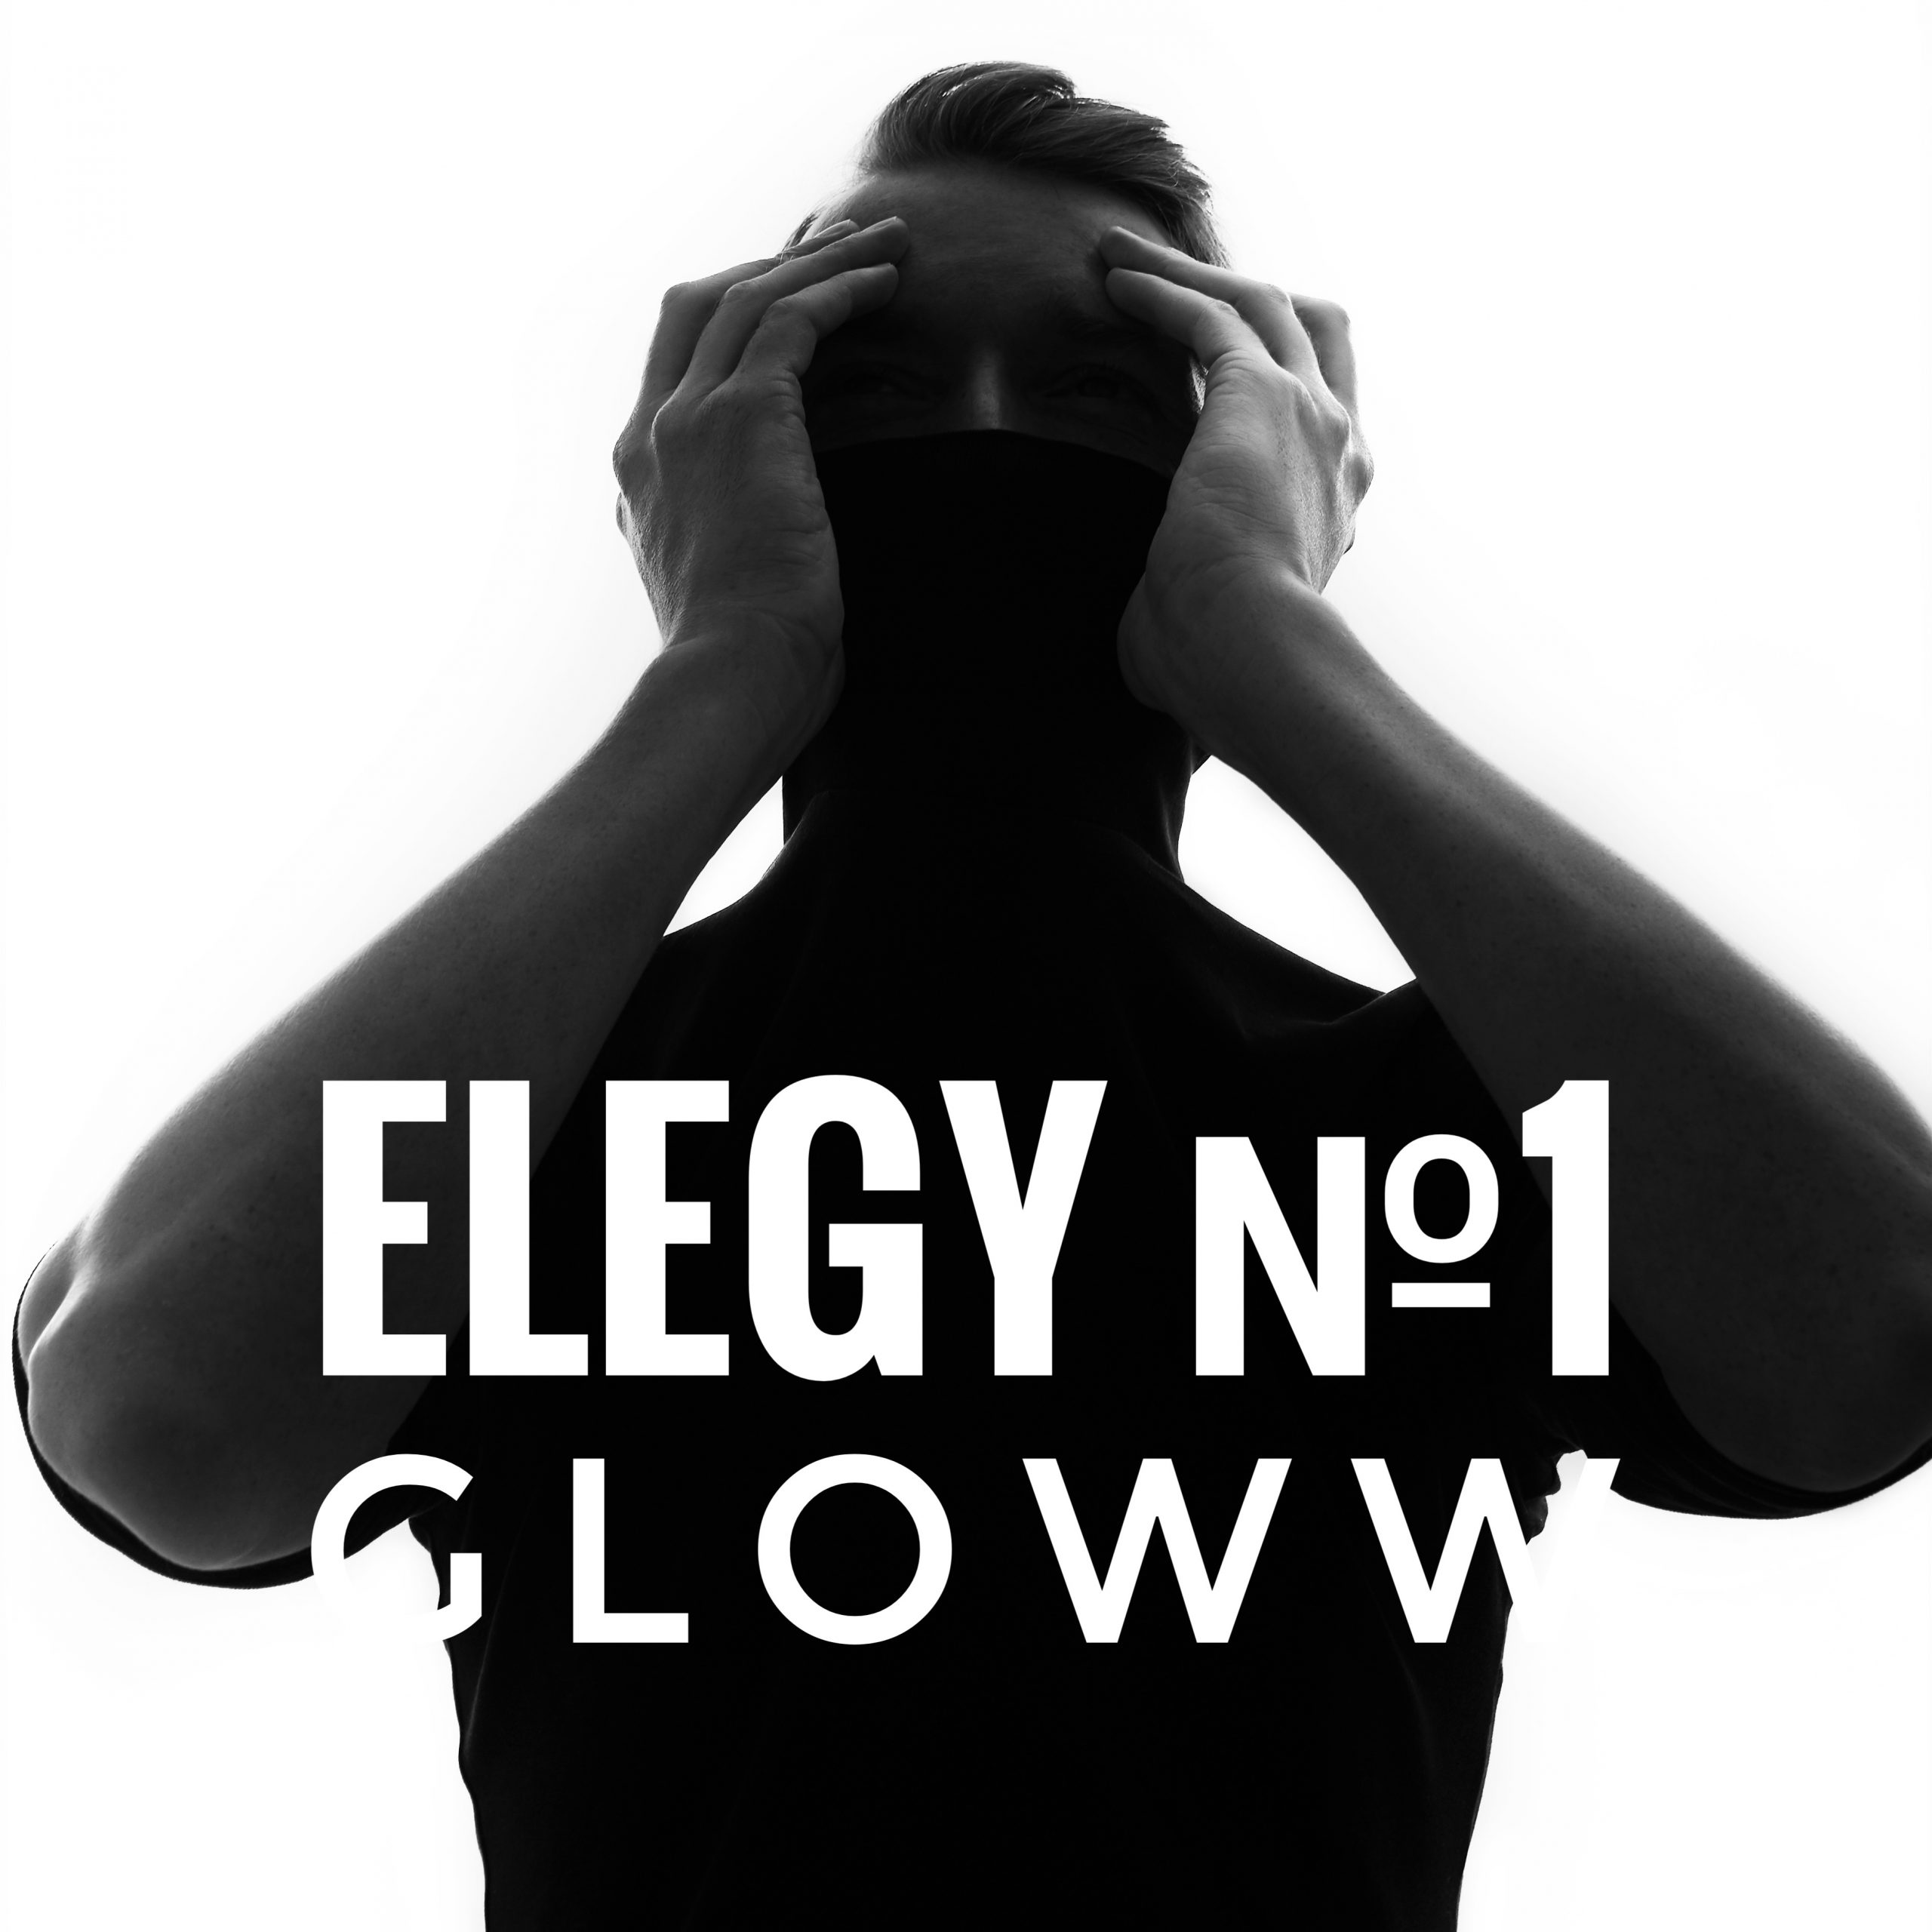 Taking you to another planet and time, ‘Gloww’ is back with hot new single ‘Elegy №1’